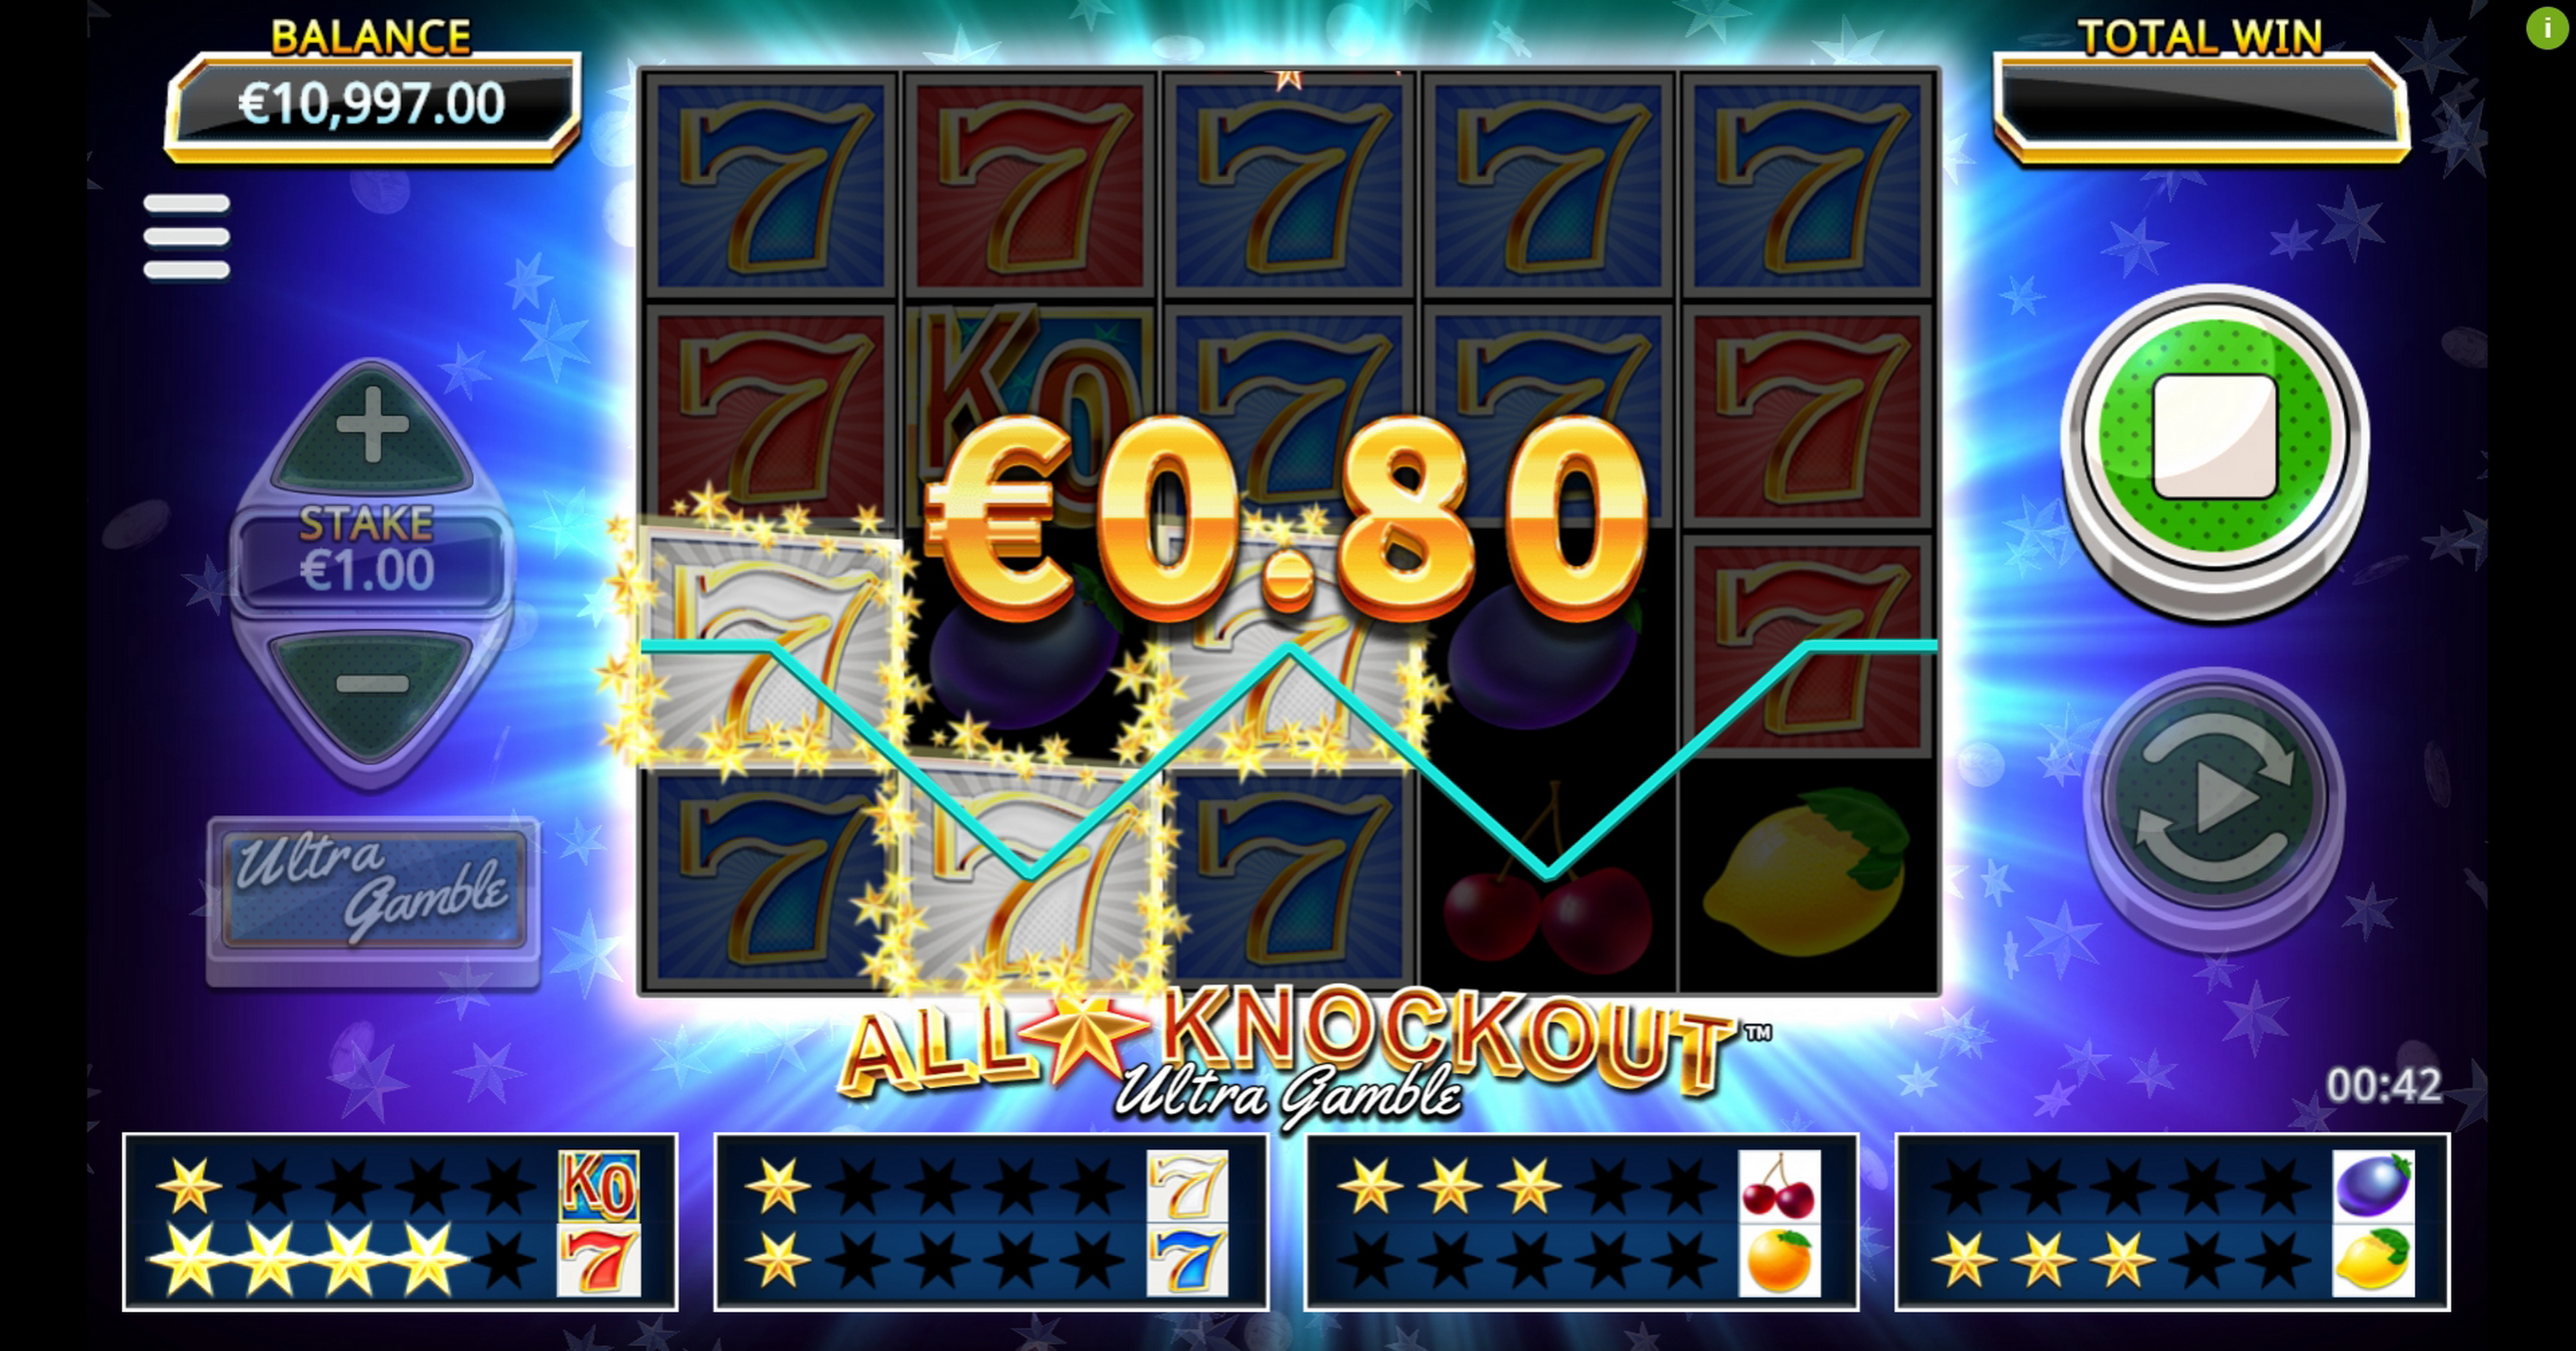 Win Money in All Star Knockout Ultra Gamble Free Slot Game by Northern Lights Gaming